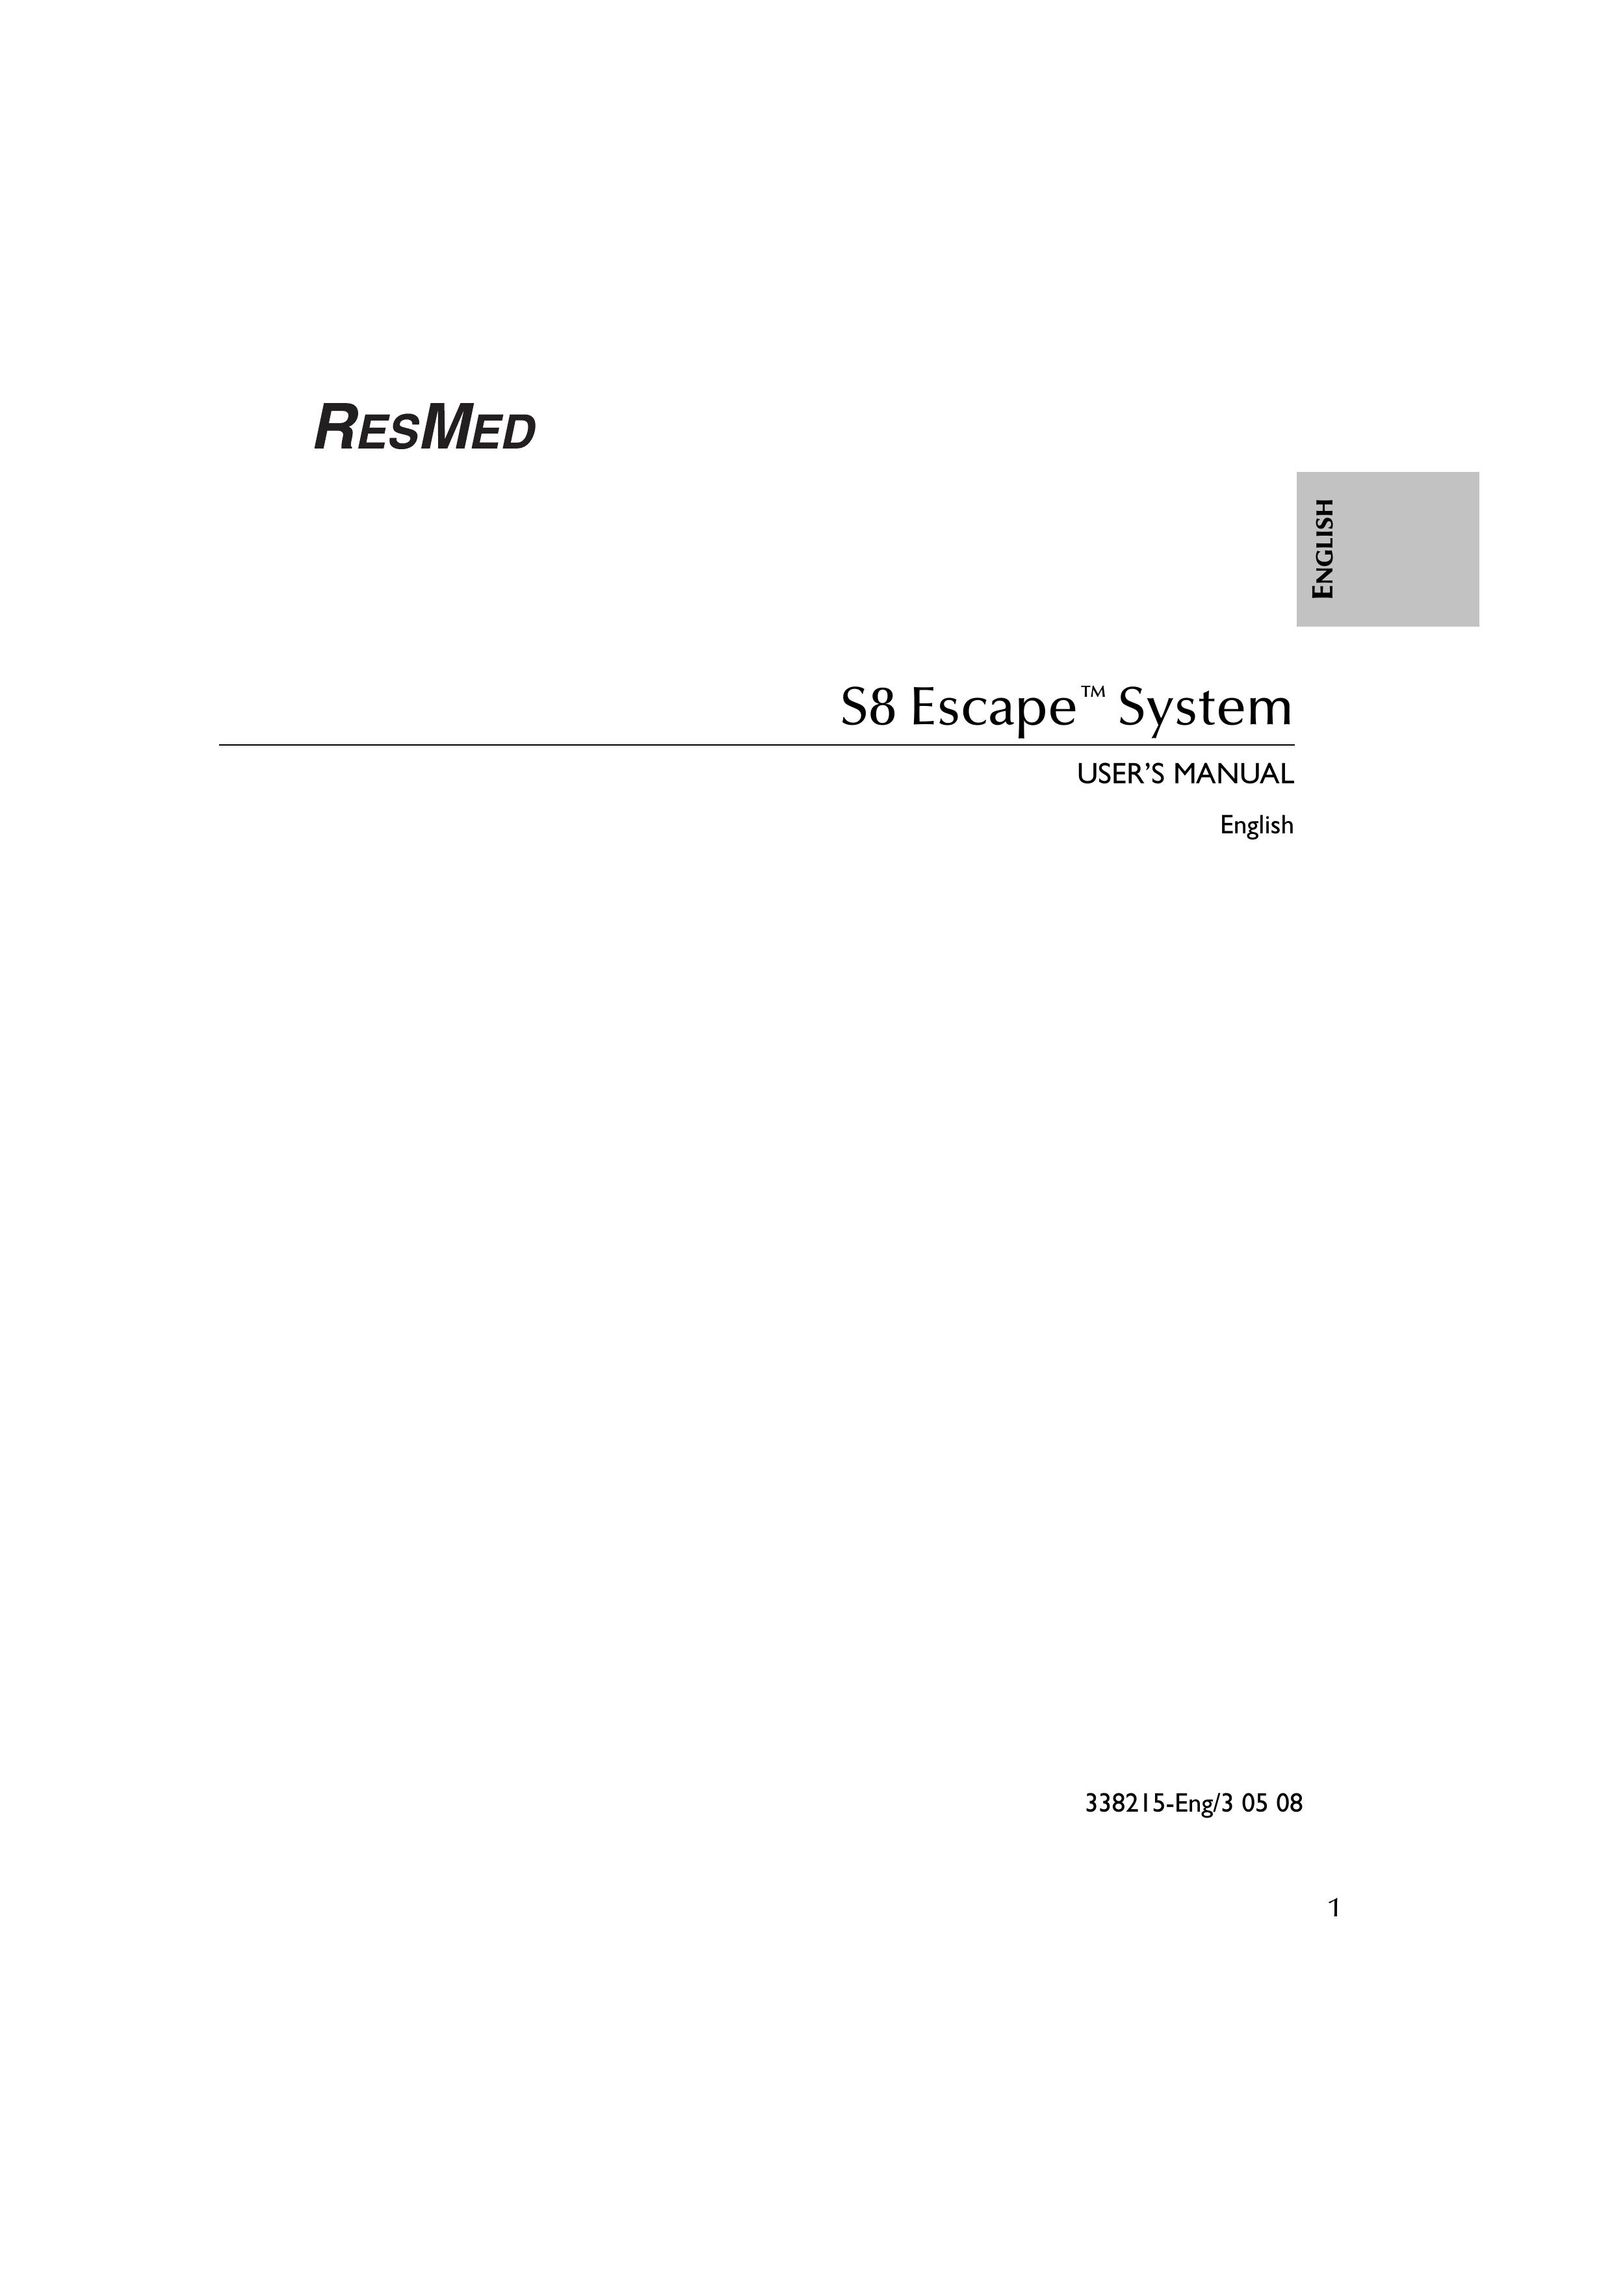 ResMed S8 ESCAPE SYSTEM Home Safety Product User Manual